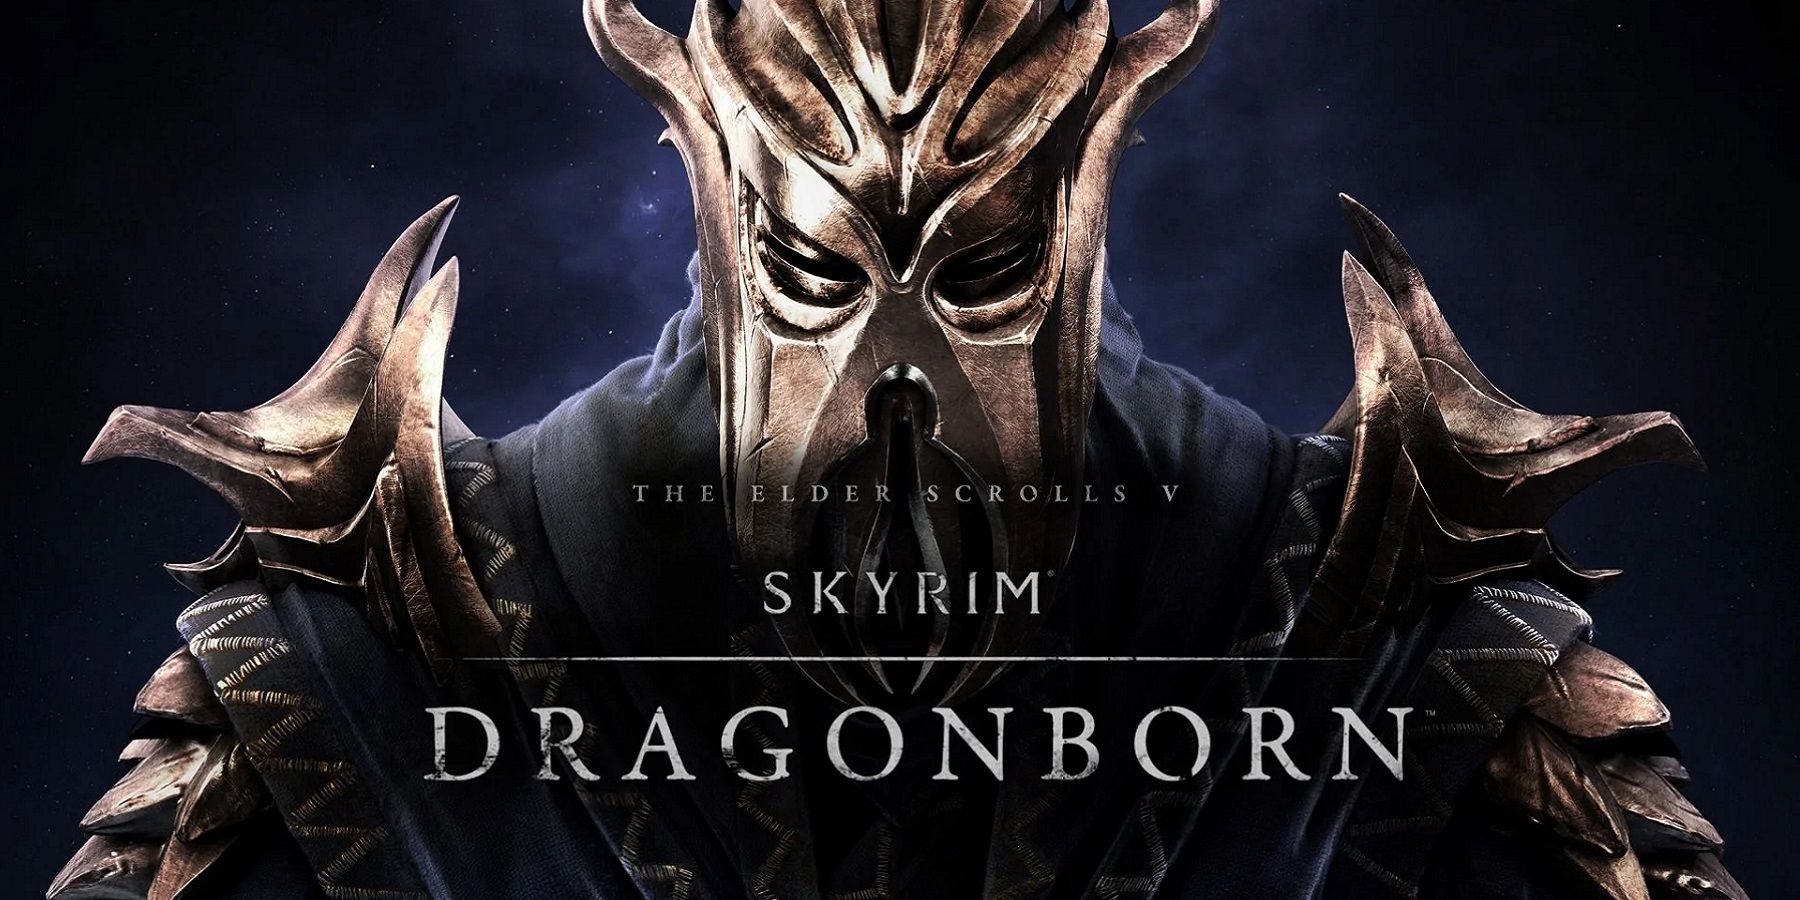 Image showing the Skyrim Dragonborn DLC title with the dragon priest Miraak behind it.